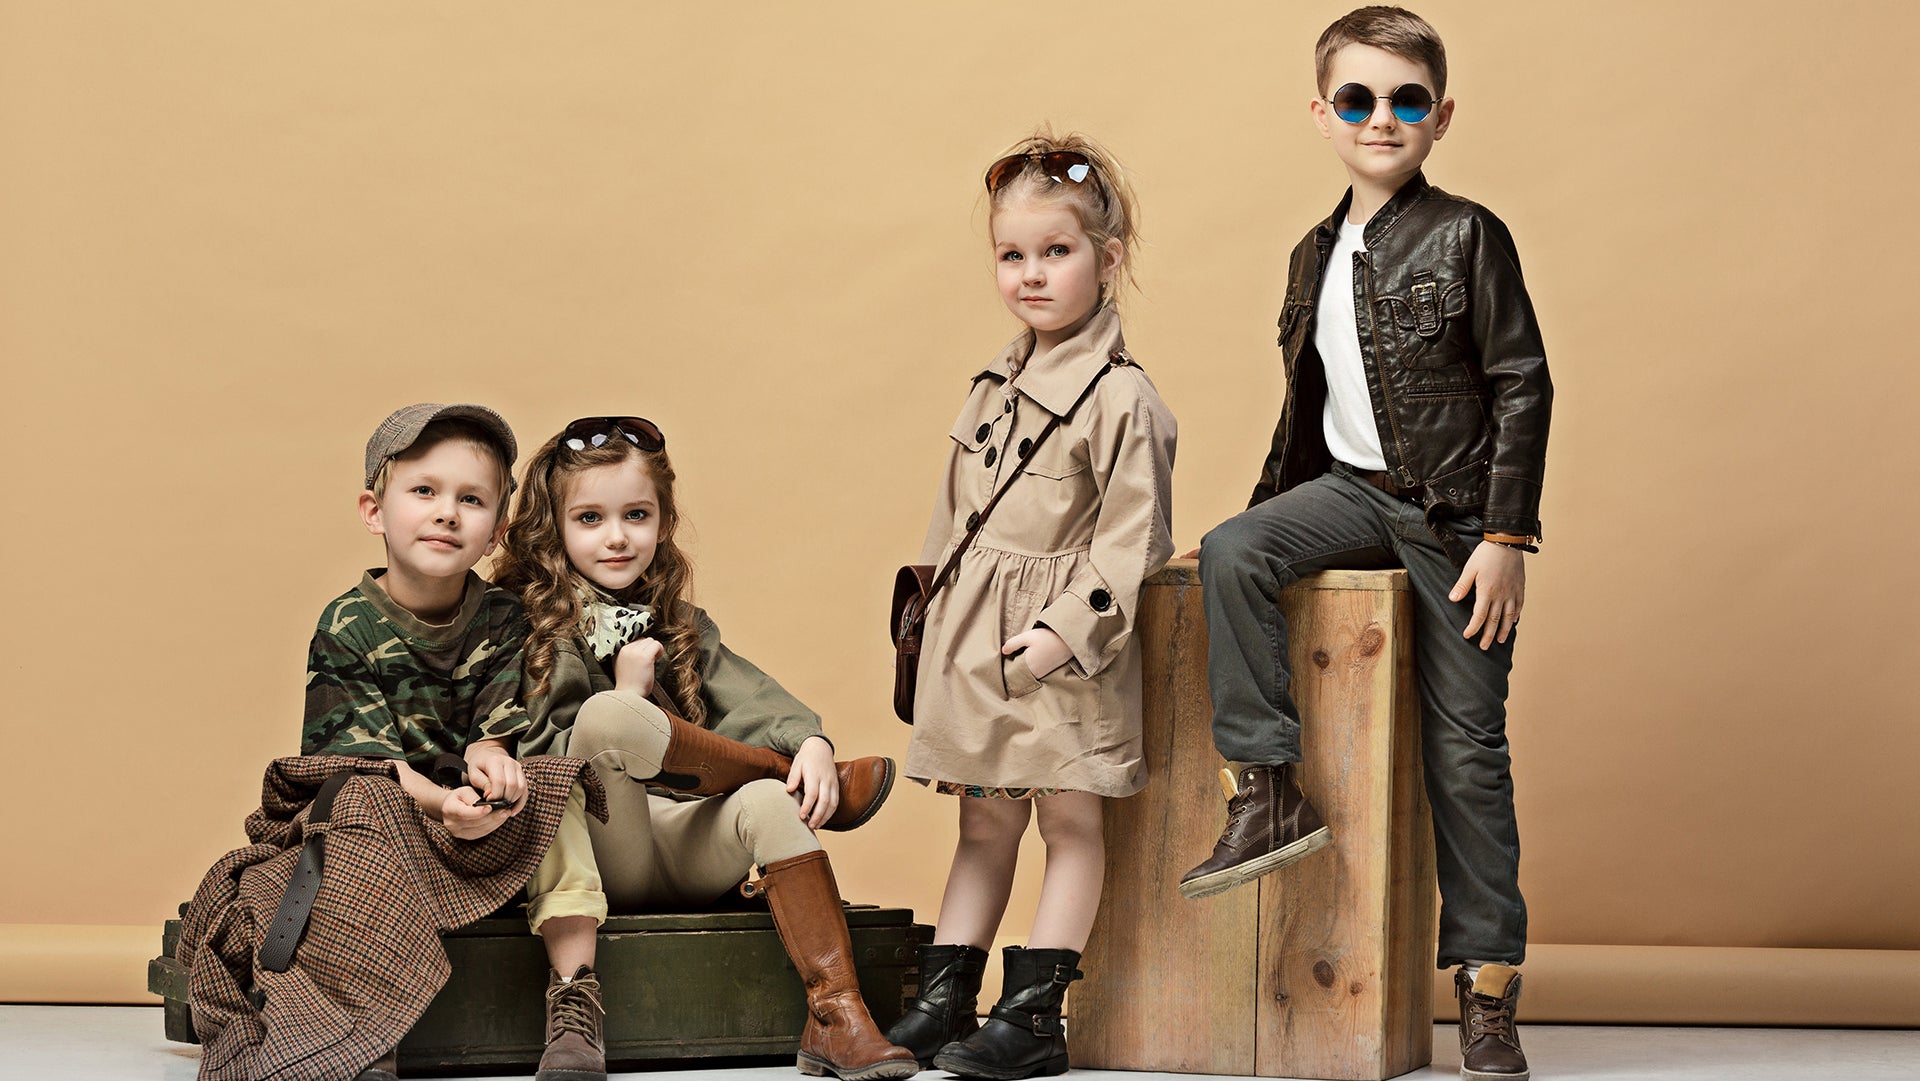 A stylish collection for kids